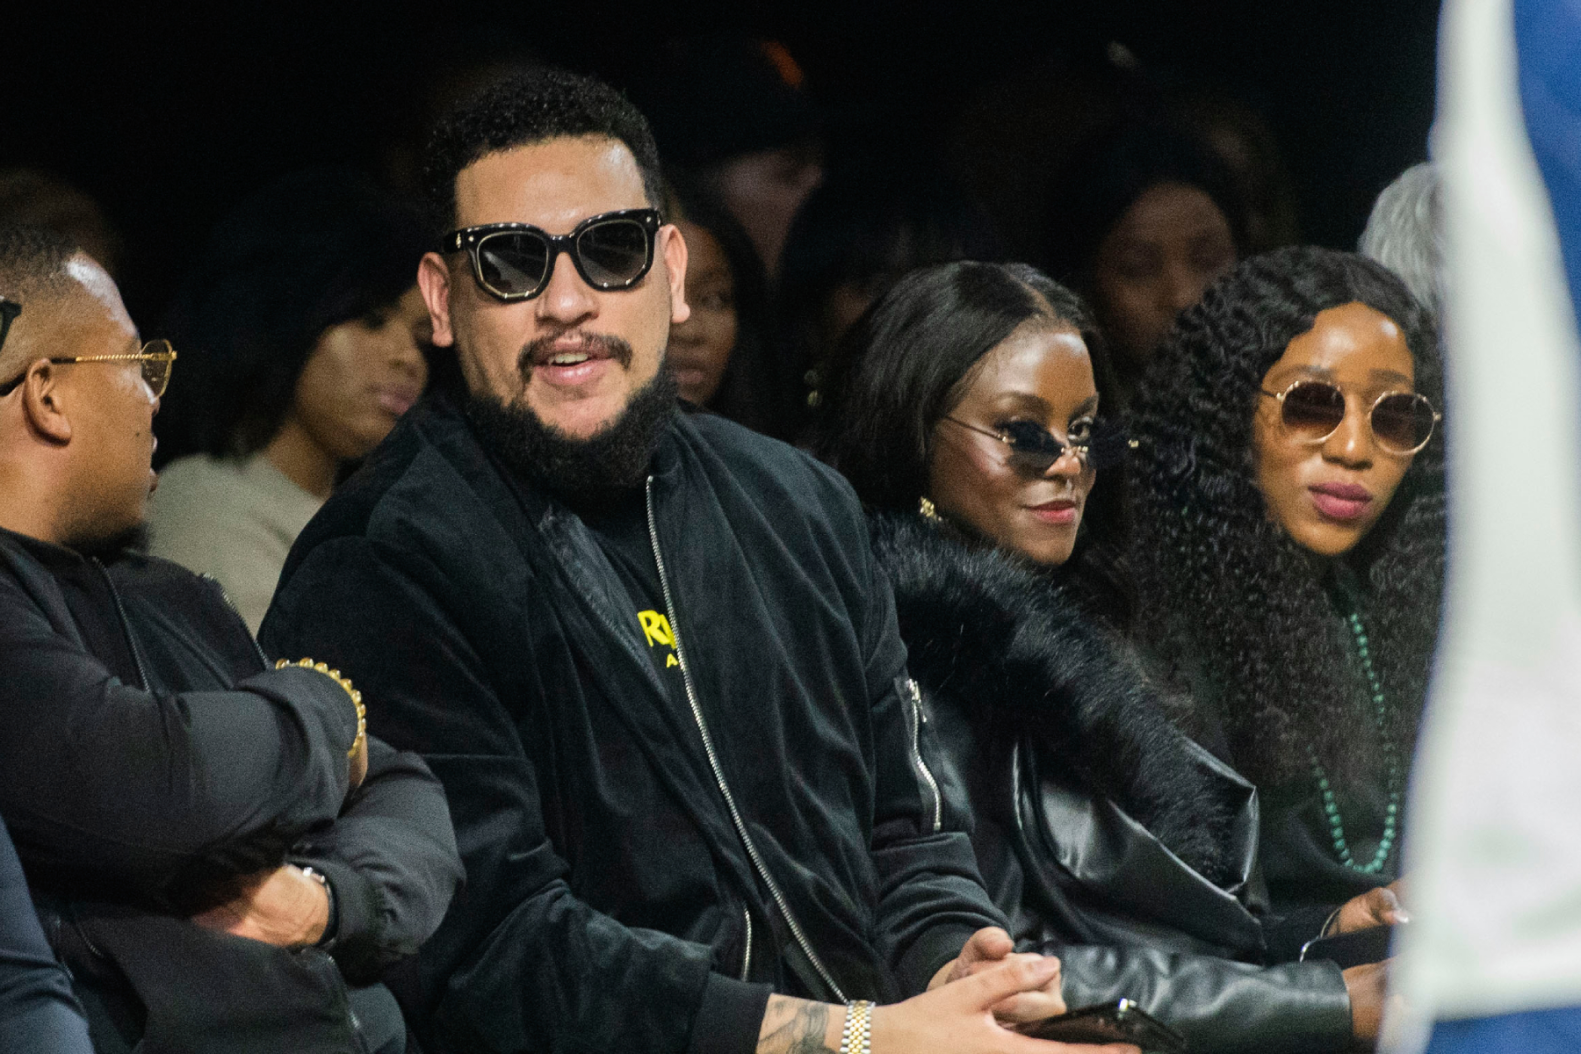 AKA's death has been confirmed by his family.